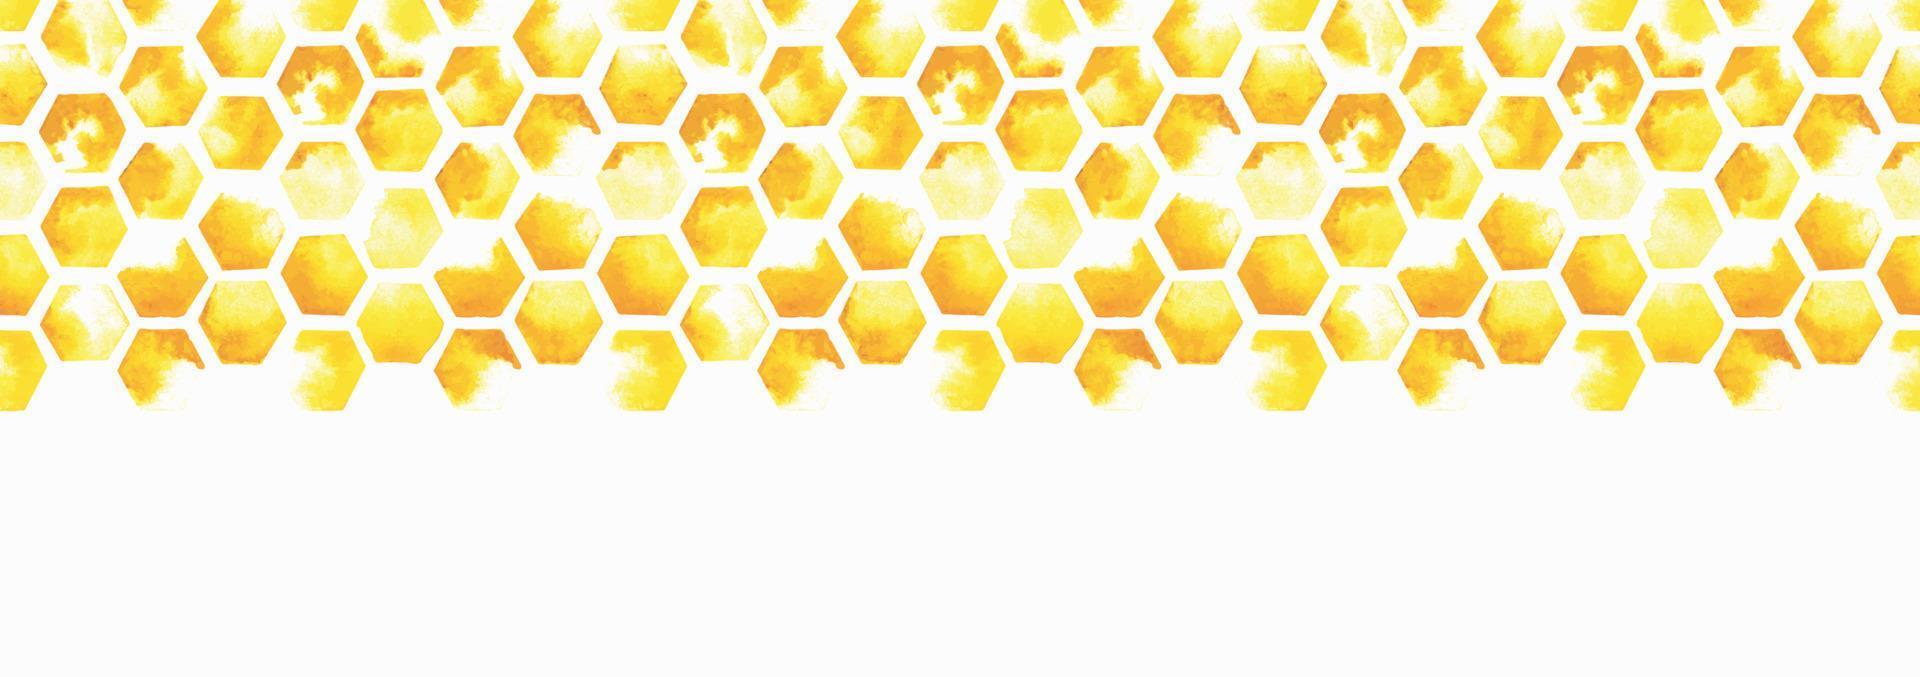 watercolor illustration seamless border, web banner. honeycomb yellow, abstract print. tile, geometric pattern with paint spots on a white background vector